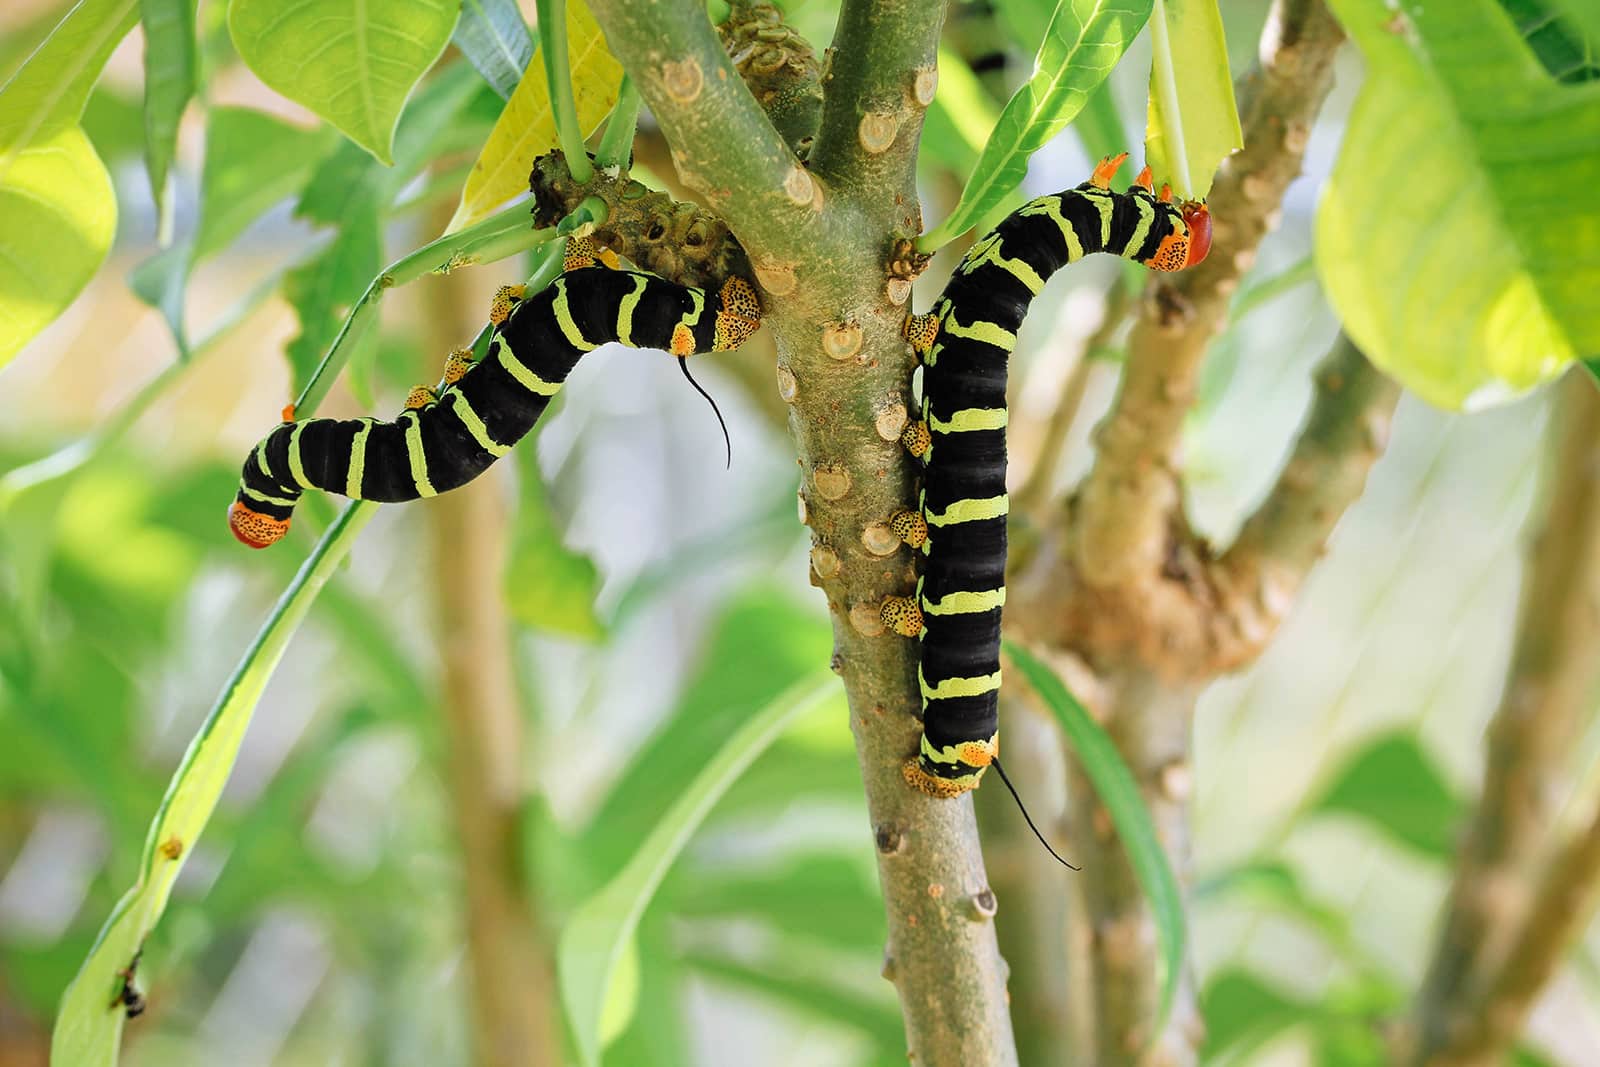 Simple Visual Guide: 17 Types of Striped Caterpillars That May Be